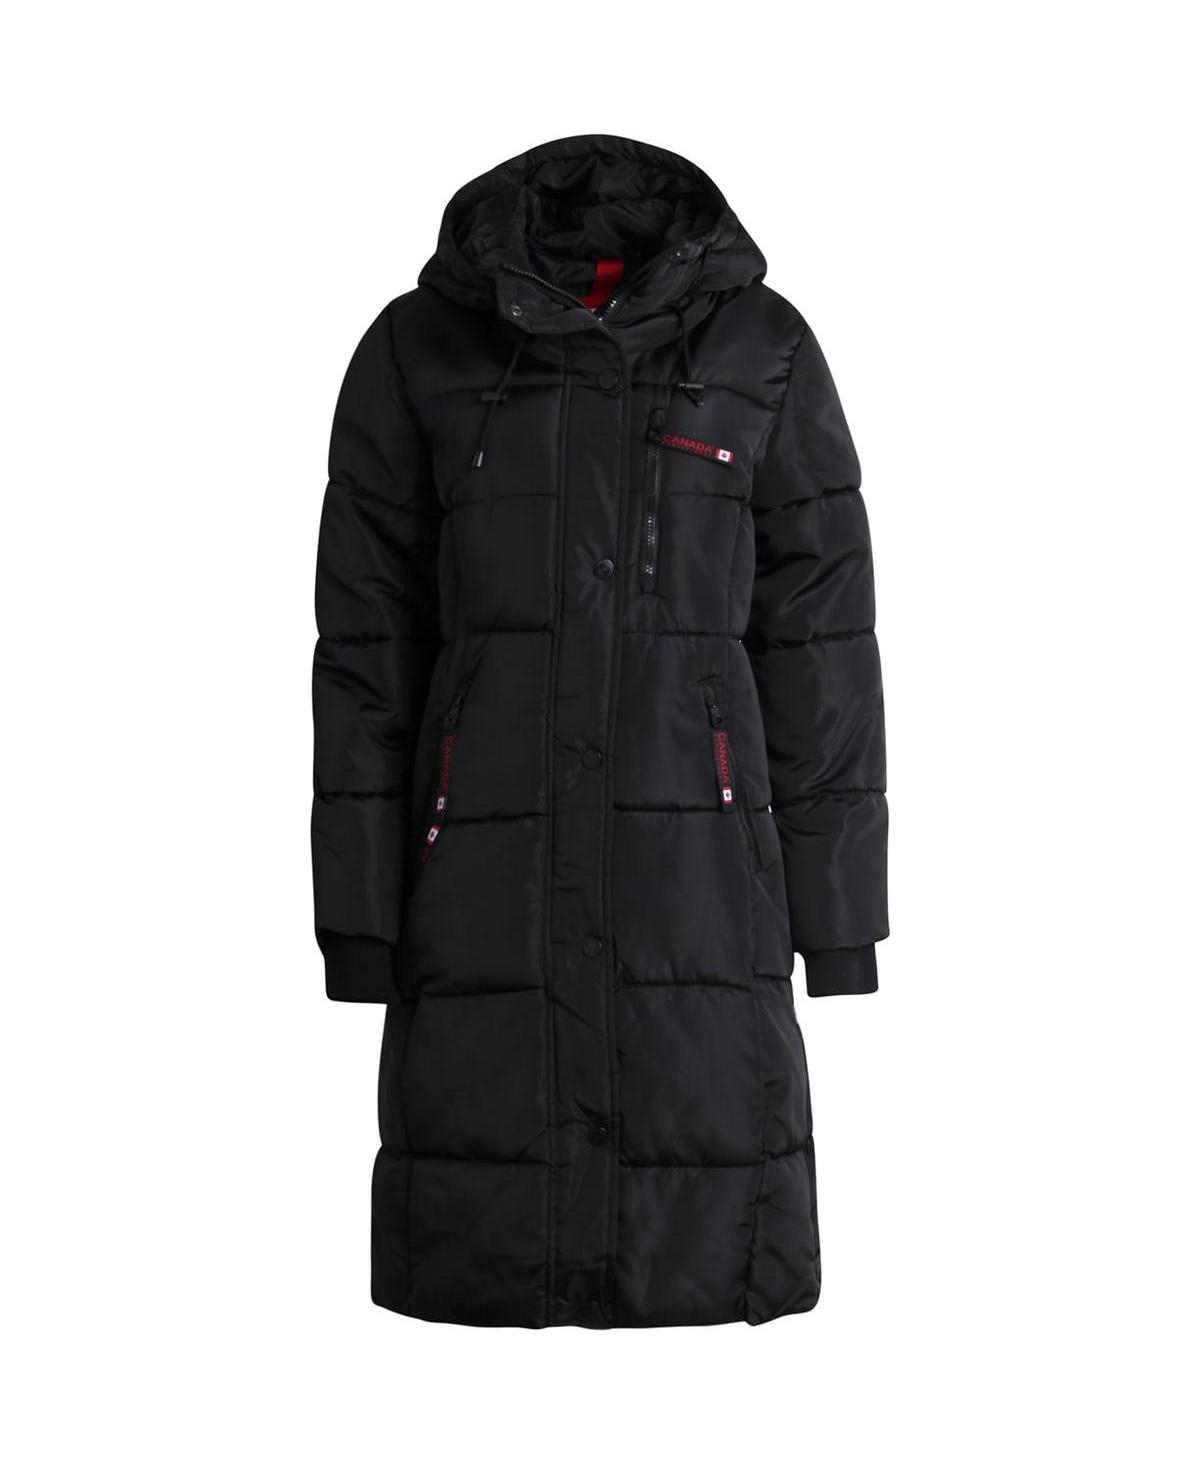 CANADA WEATHER GEAR PLUS SIZE QUILTED LONG PUFFER JACKET